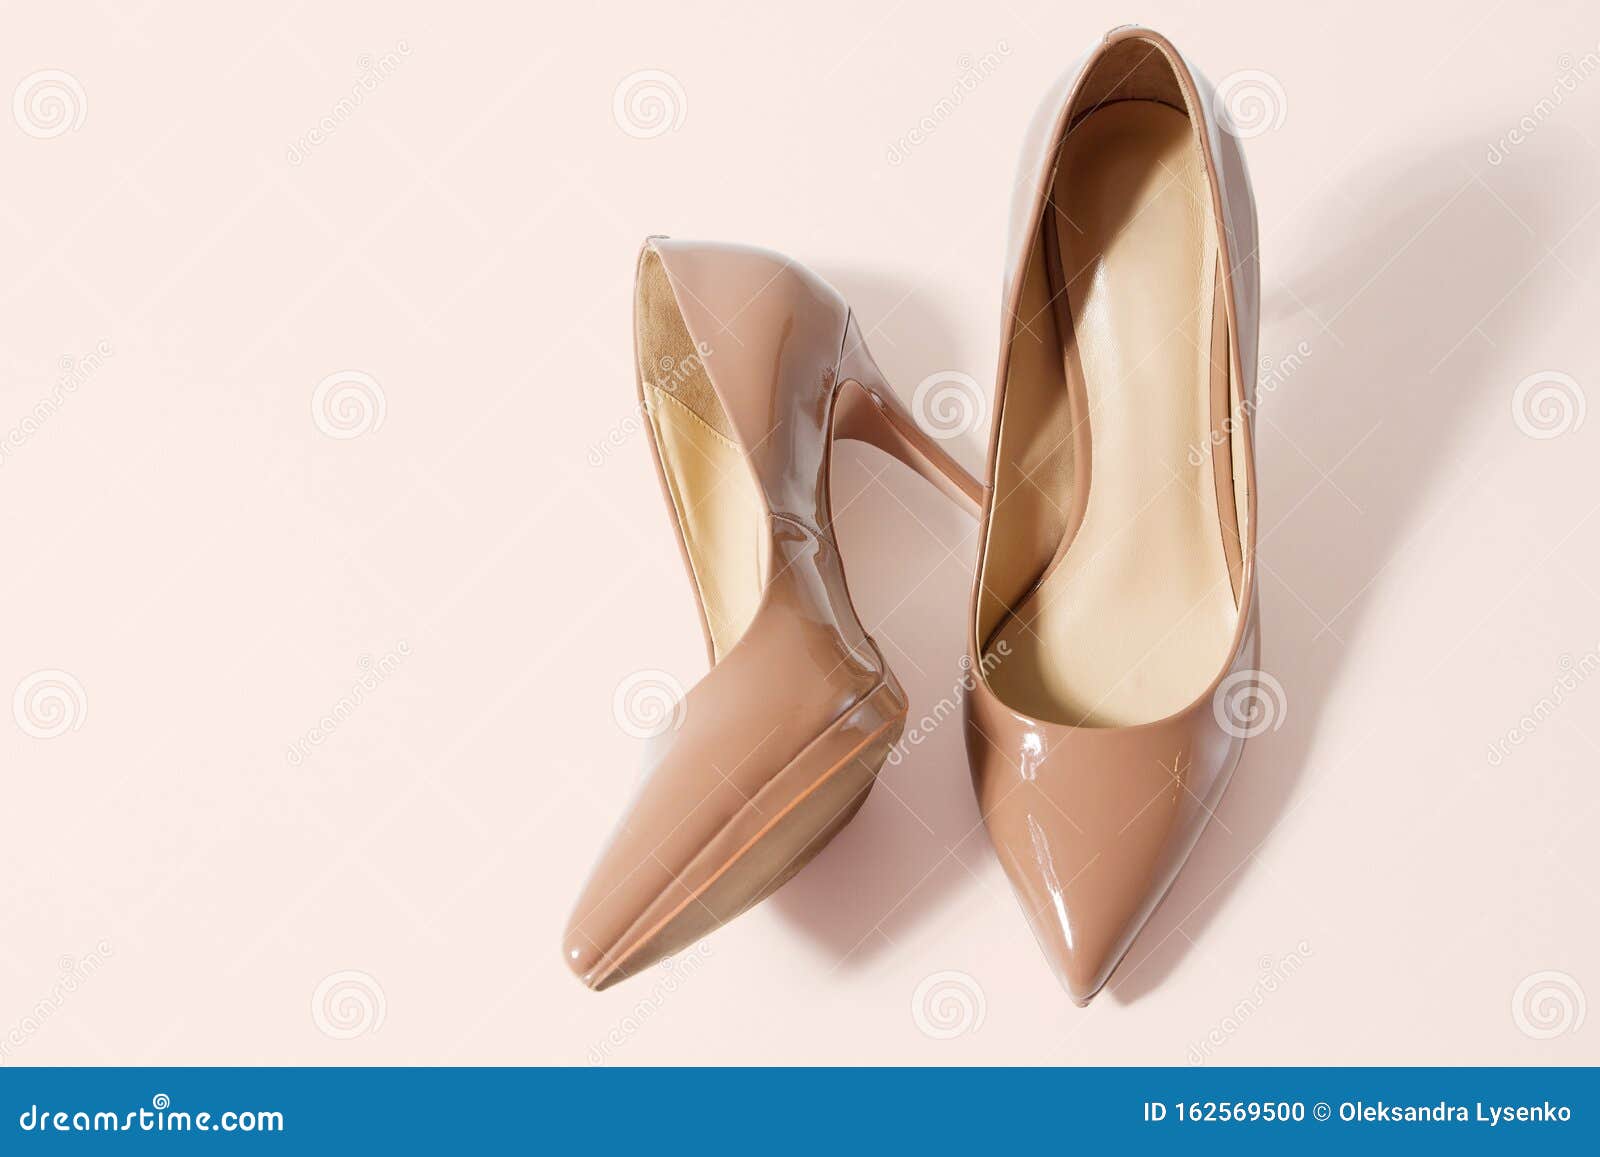 Woman Shoes . High Heels Closeup. Top View. Women Fashion. Ladies  Accessories. Girly Casual Formal Shoe Isolated Stock Photo - Image of boot,  fashion: 162569500